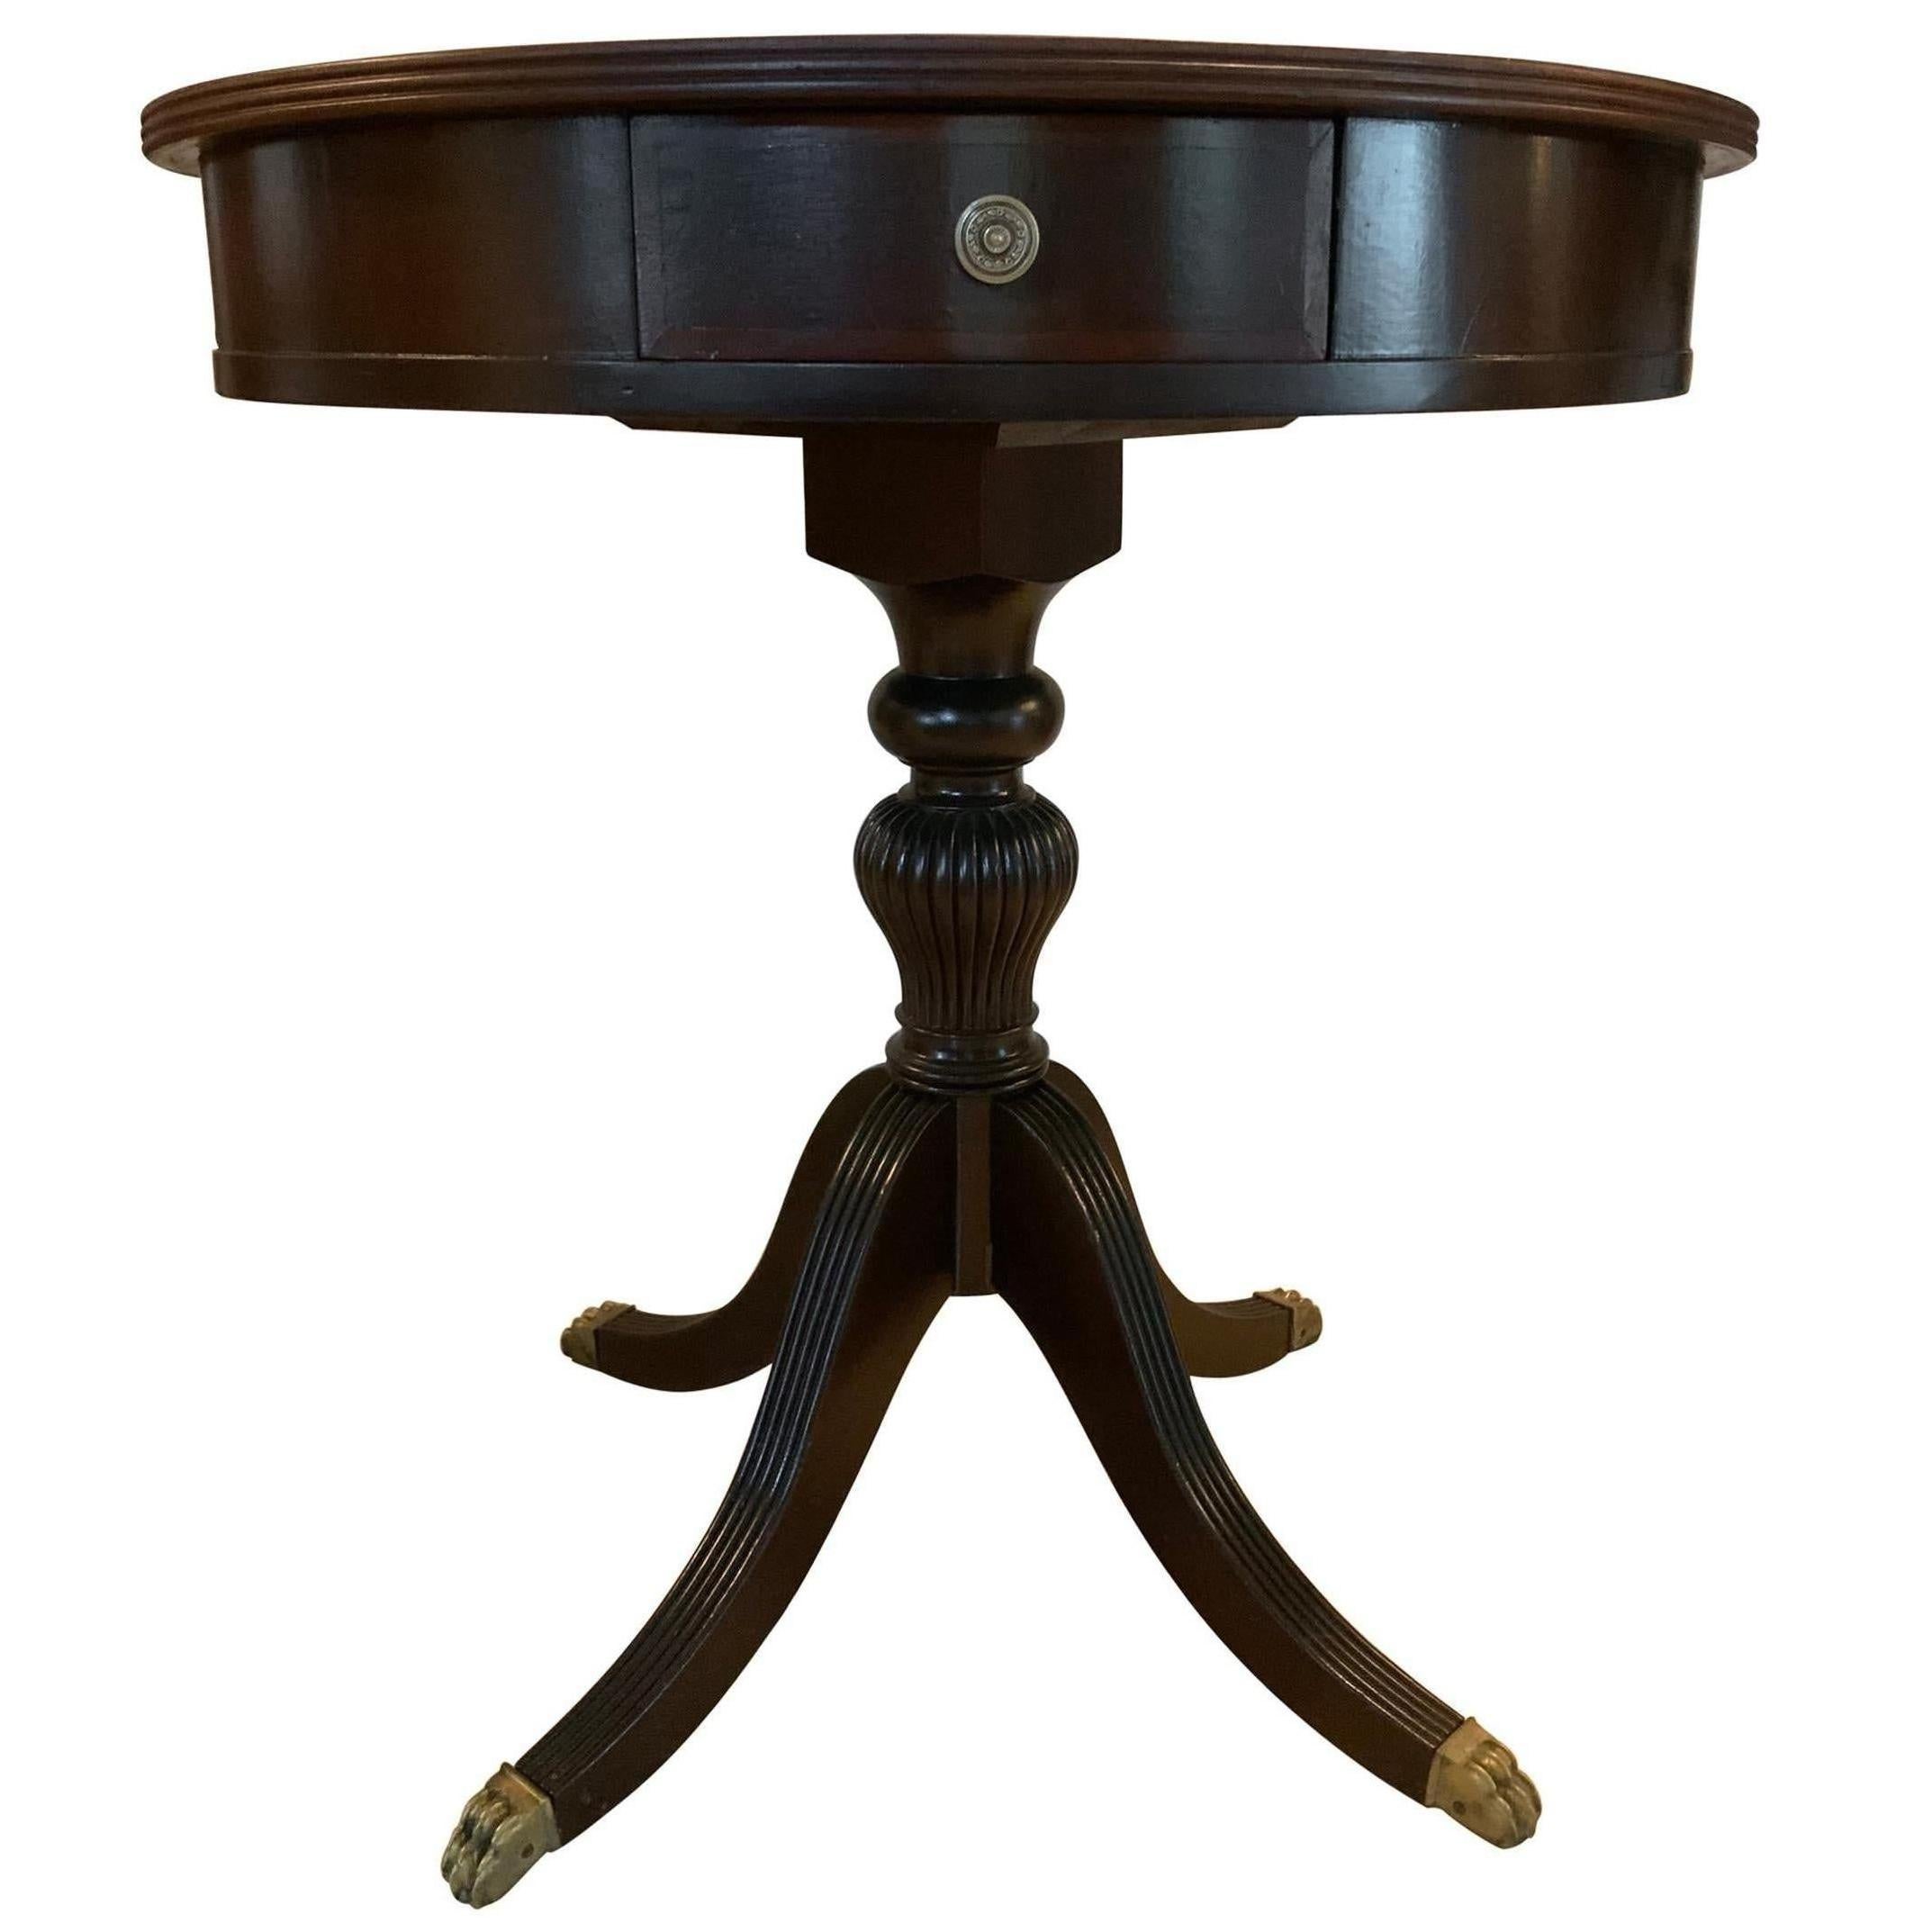 20th Century Charak Furniture Co Bofton Mafs Wood Drum Table For Sale